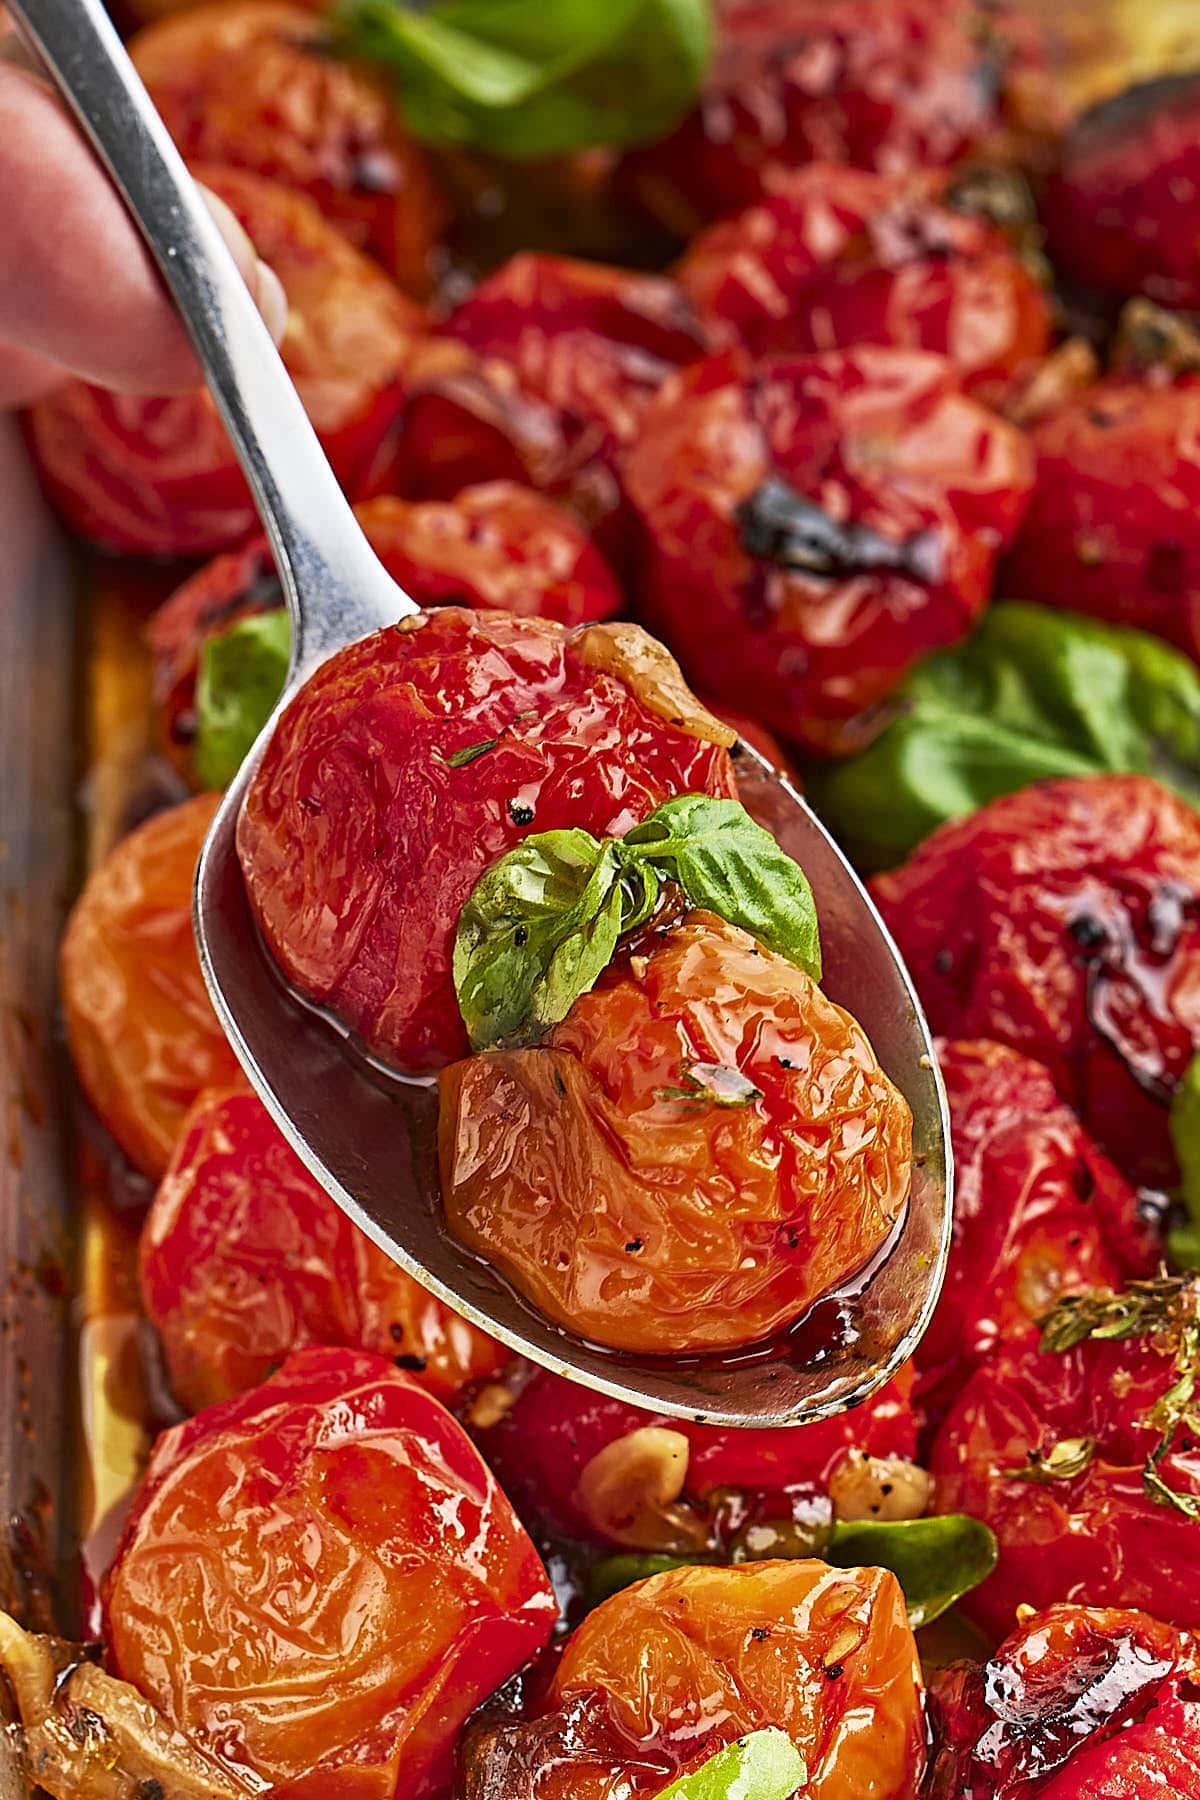 Closeup of a serving spoon loaded with roasted cherry tomatoes.